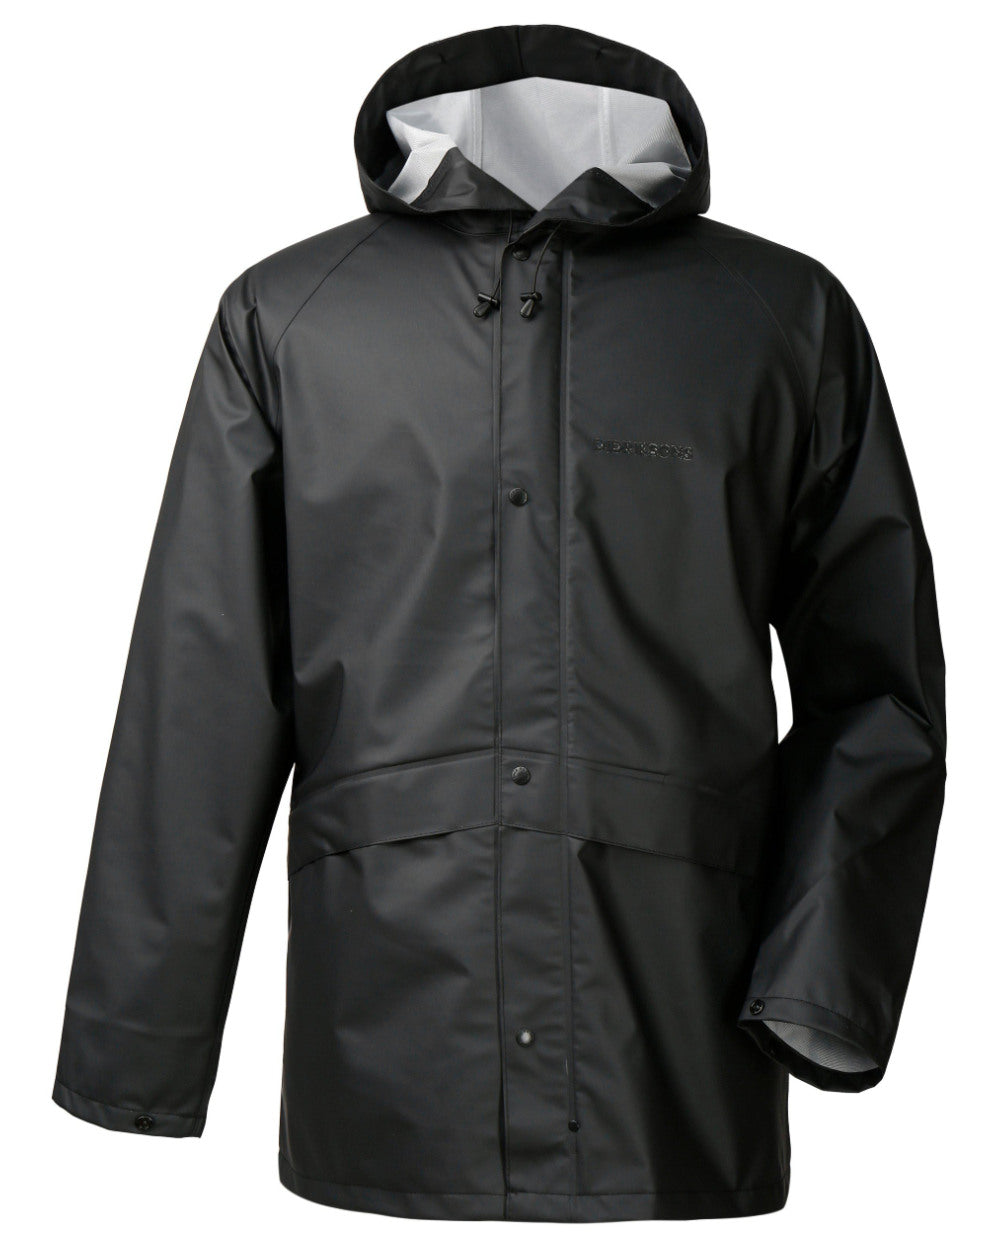 Black Coloured Didriksons Avon Waterproof Jacket On A White Background 